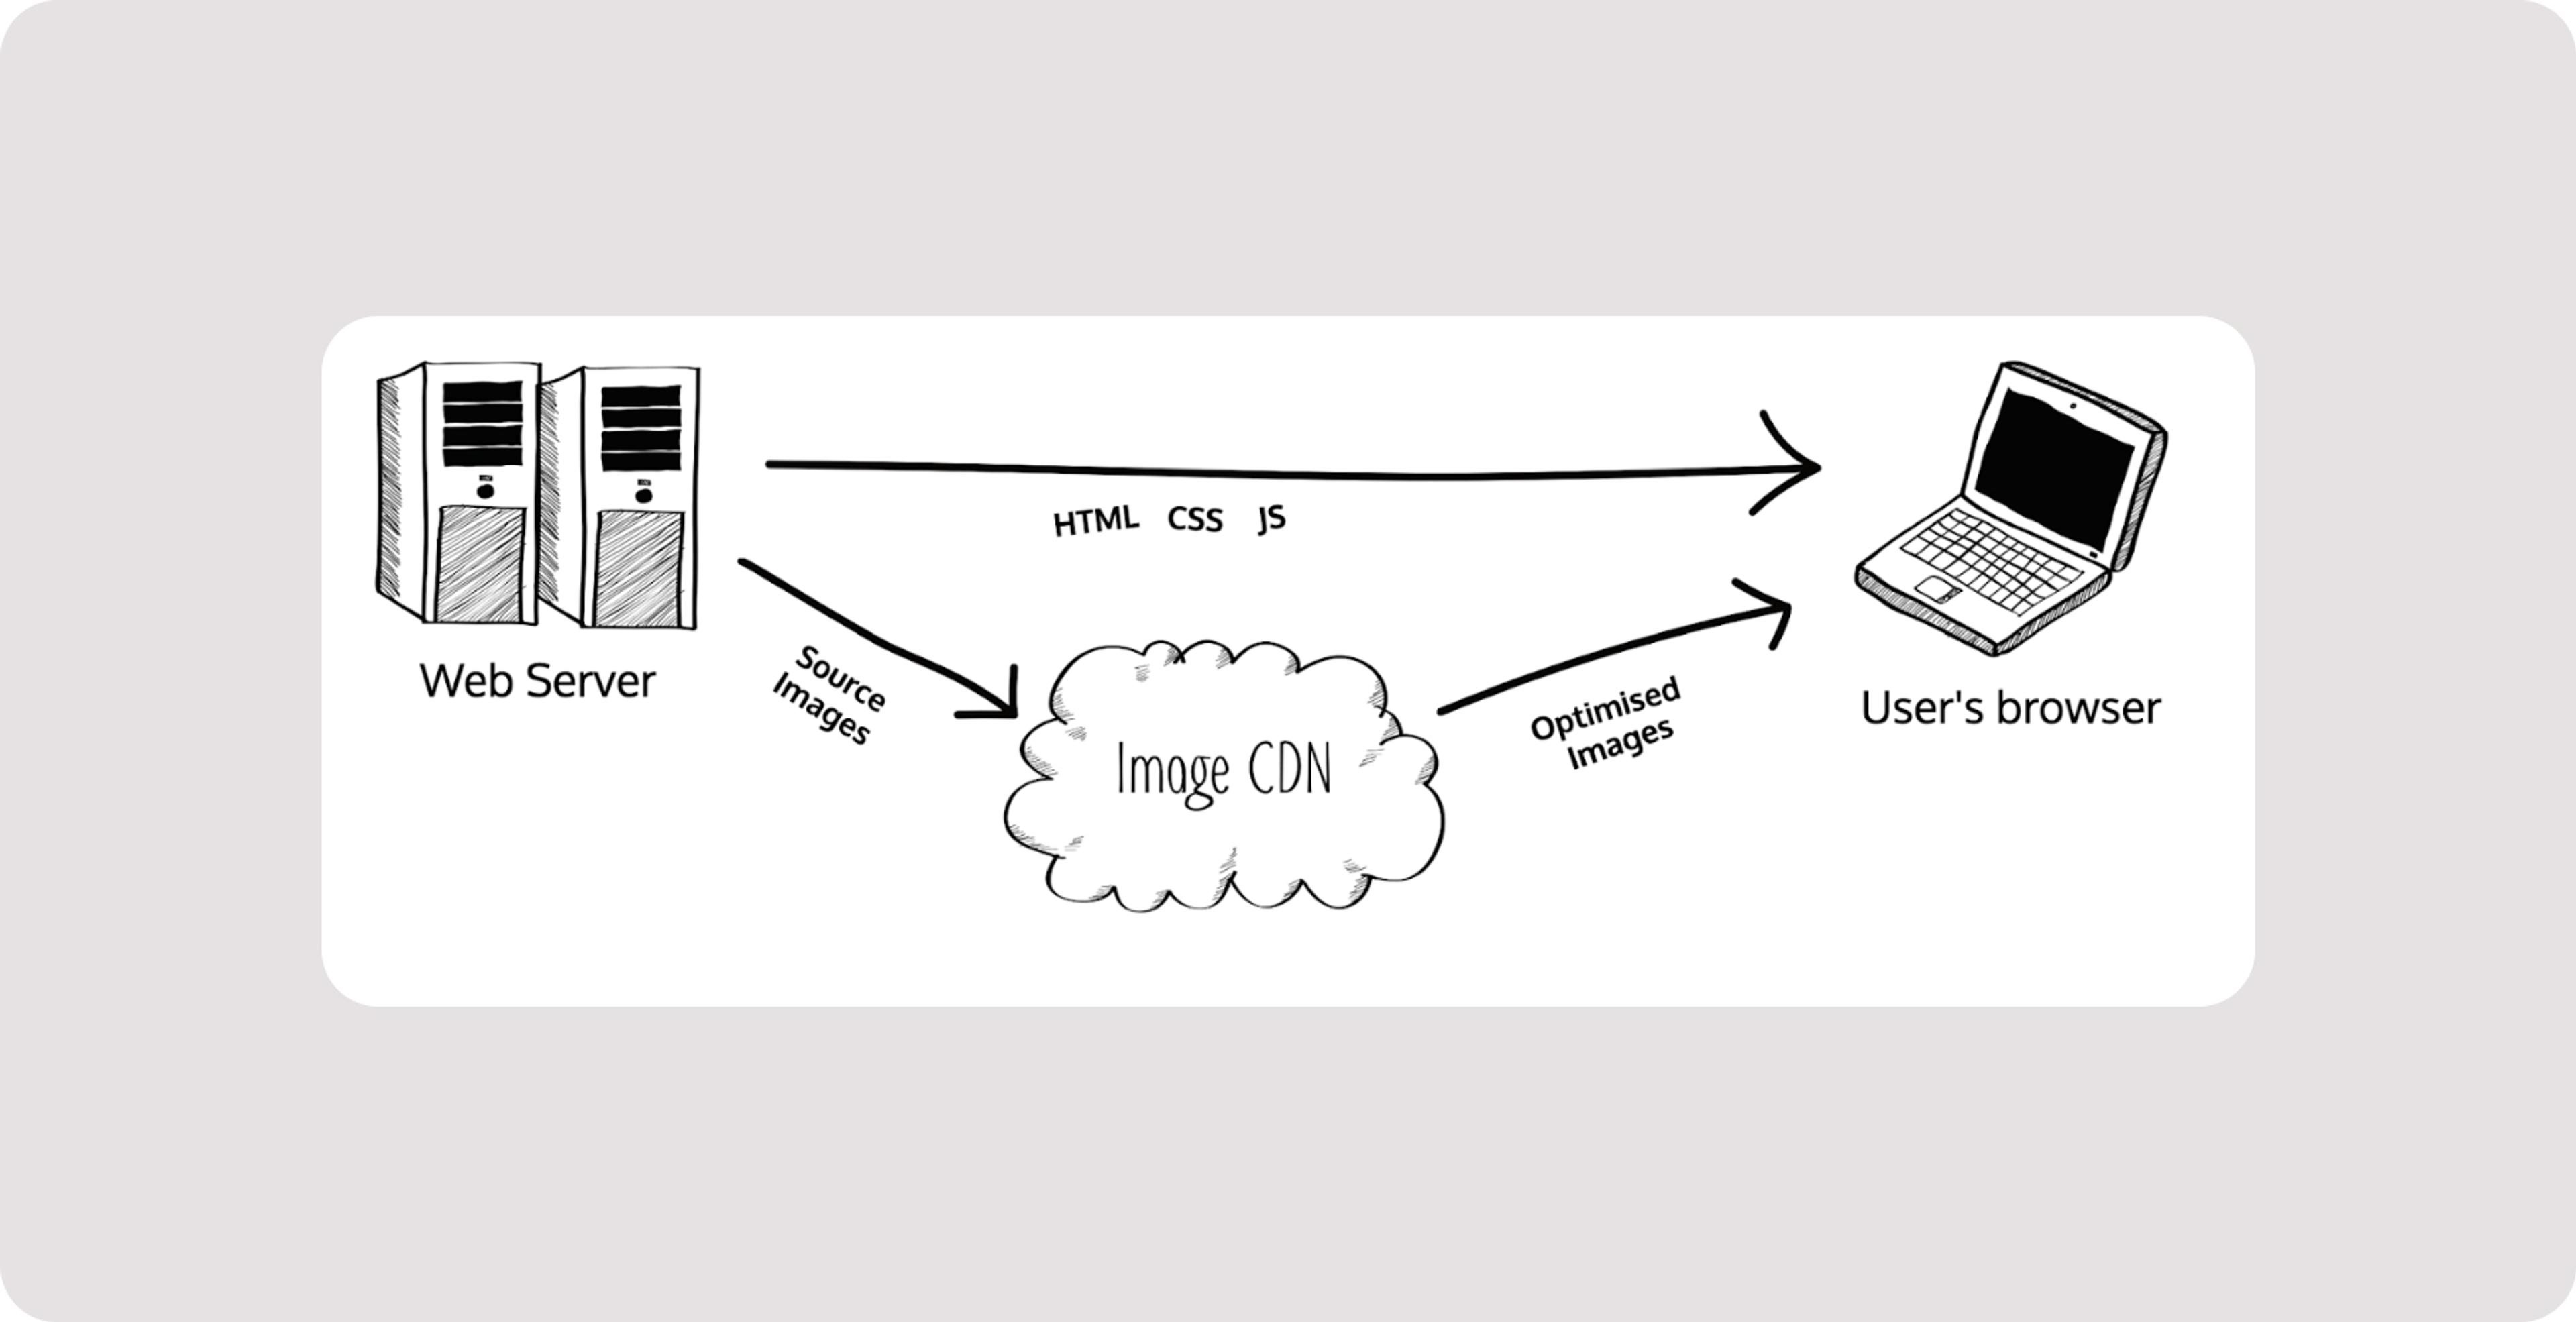 Illustrated diagram with Web Server at left represented by 90s PC Towers, User’s browser at right represented by a laptop, Image CDN at centre bottom represented by a cloud. From Server to Browser is an arrow with HTML, CSS and JS. From Server to Image CDN is an arrow with Source Images. From Image CDN to Browser is an arrow with Optimised Images.